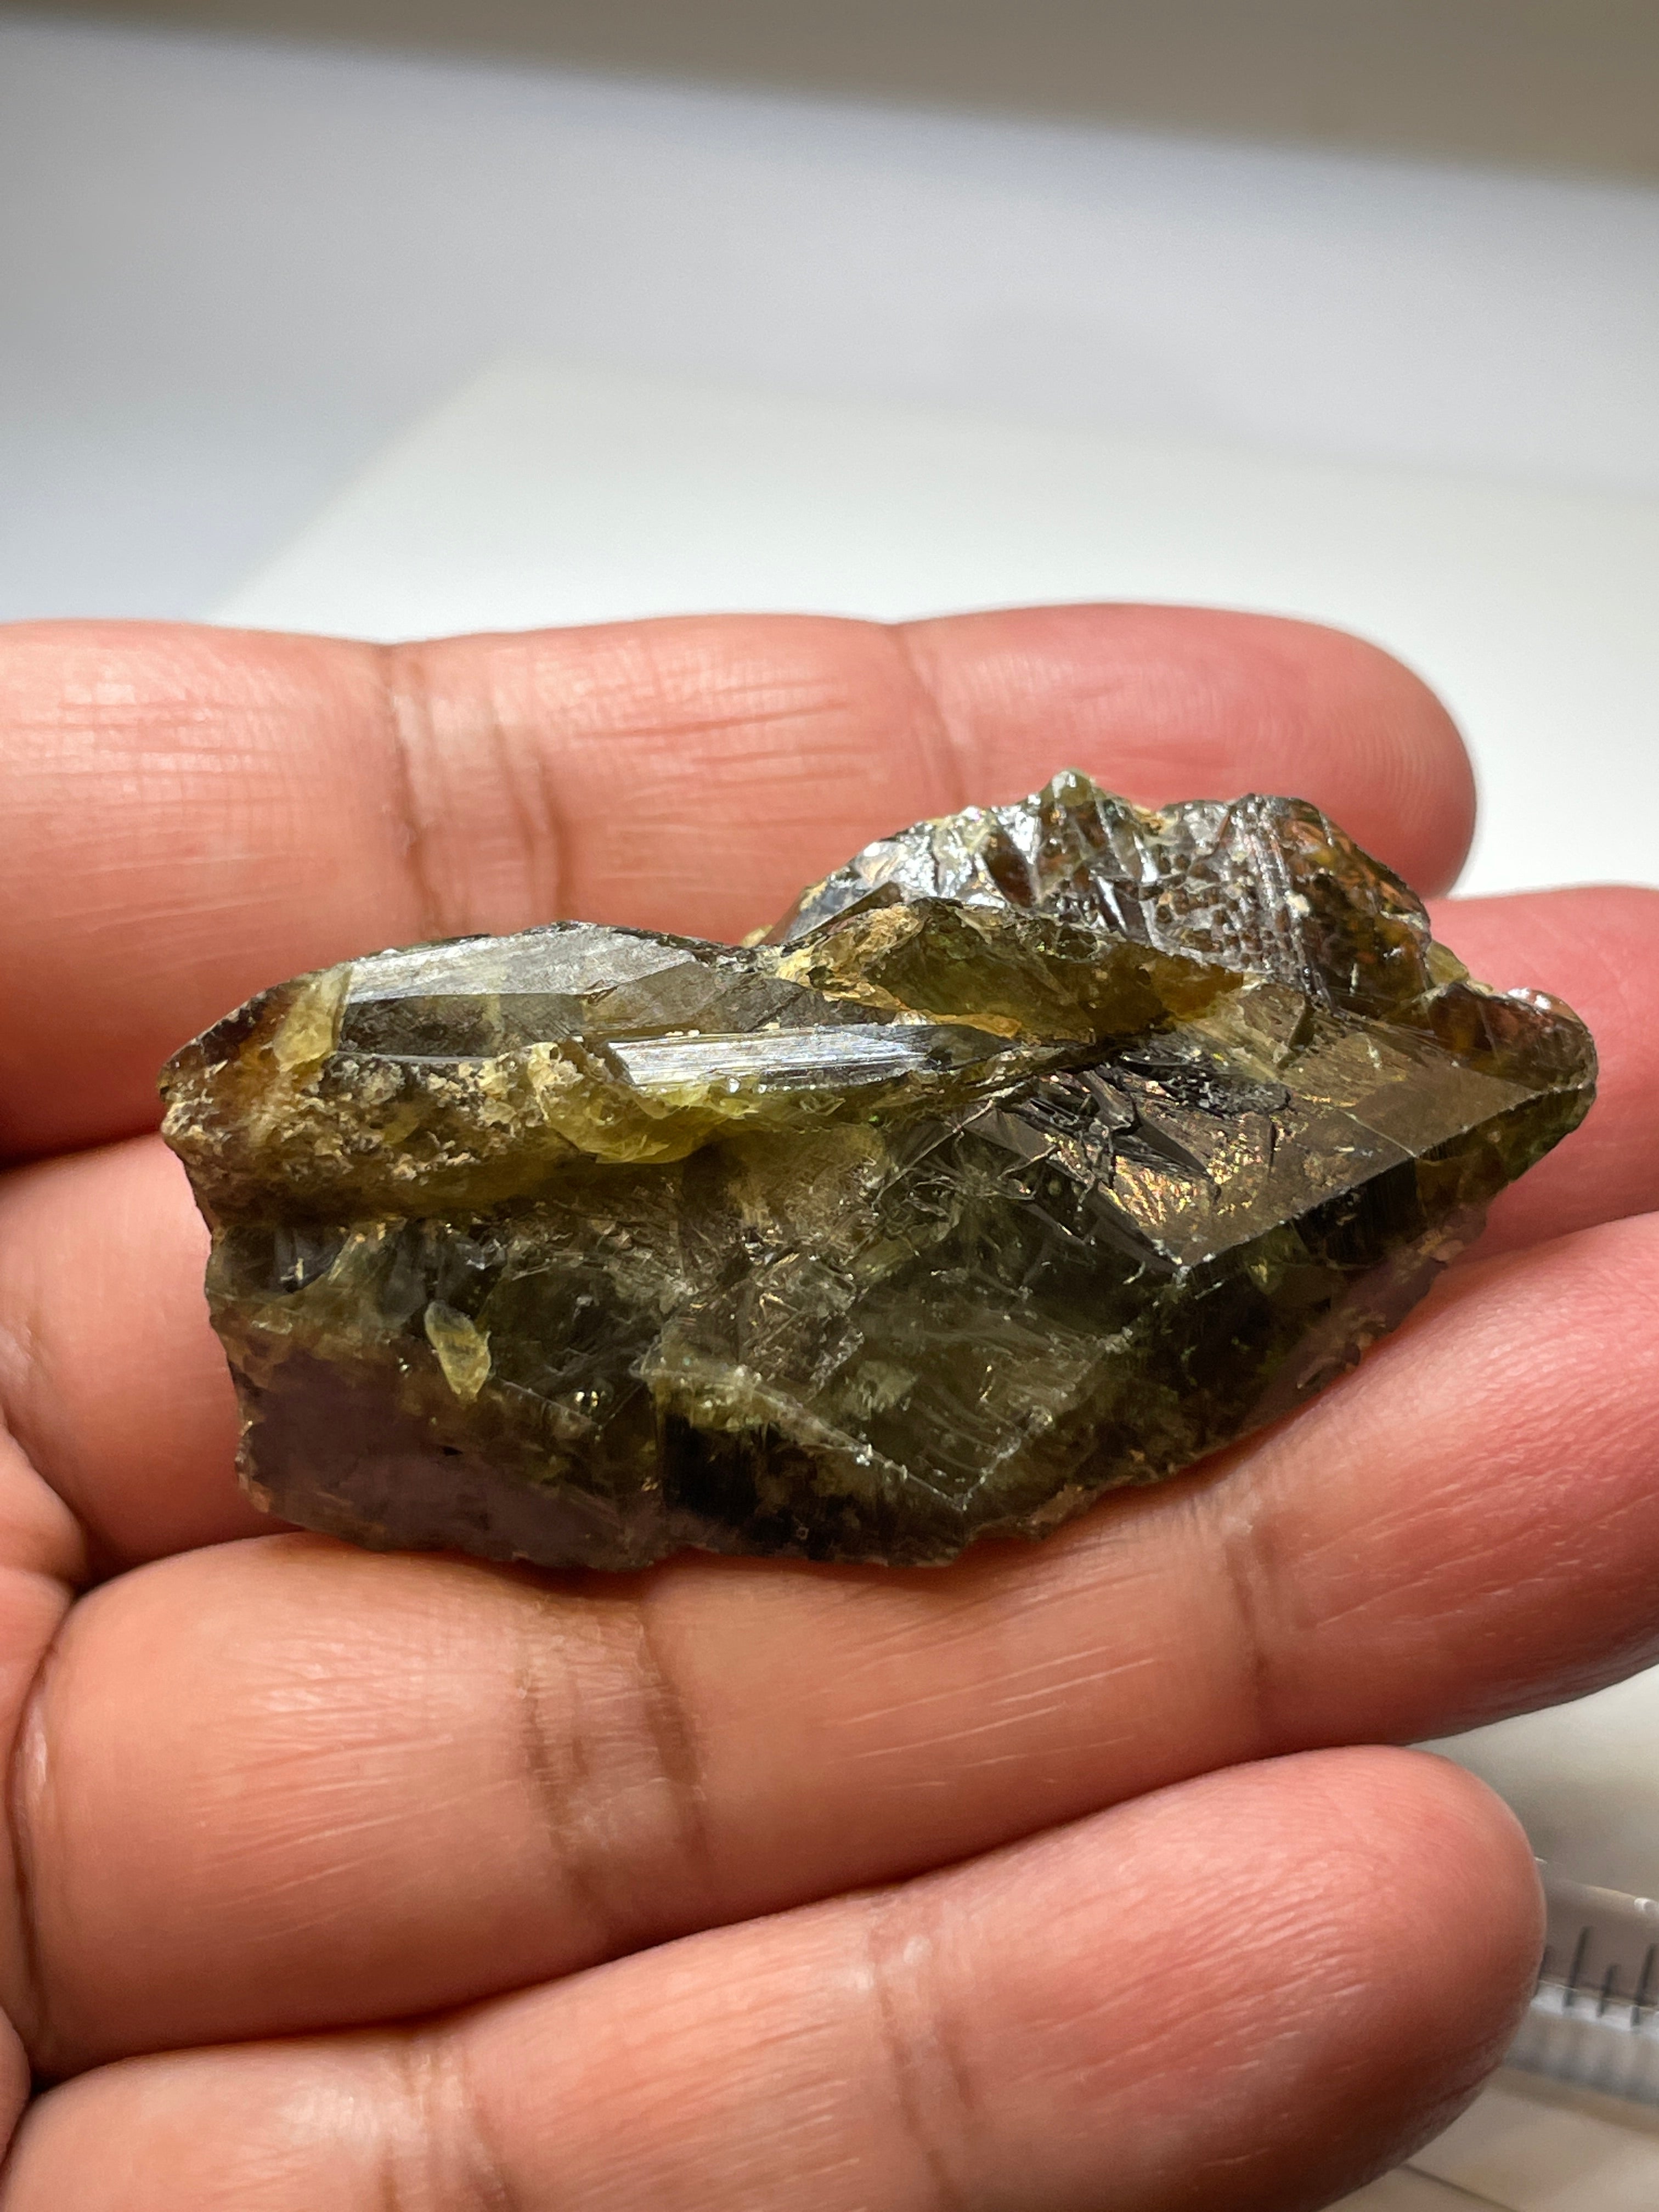 207.64Ct / 41.52Gm Tanzanian Sphene Crystal Untreated Unheated. 53.9 X 28.2 19.1Mm Very High End